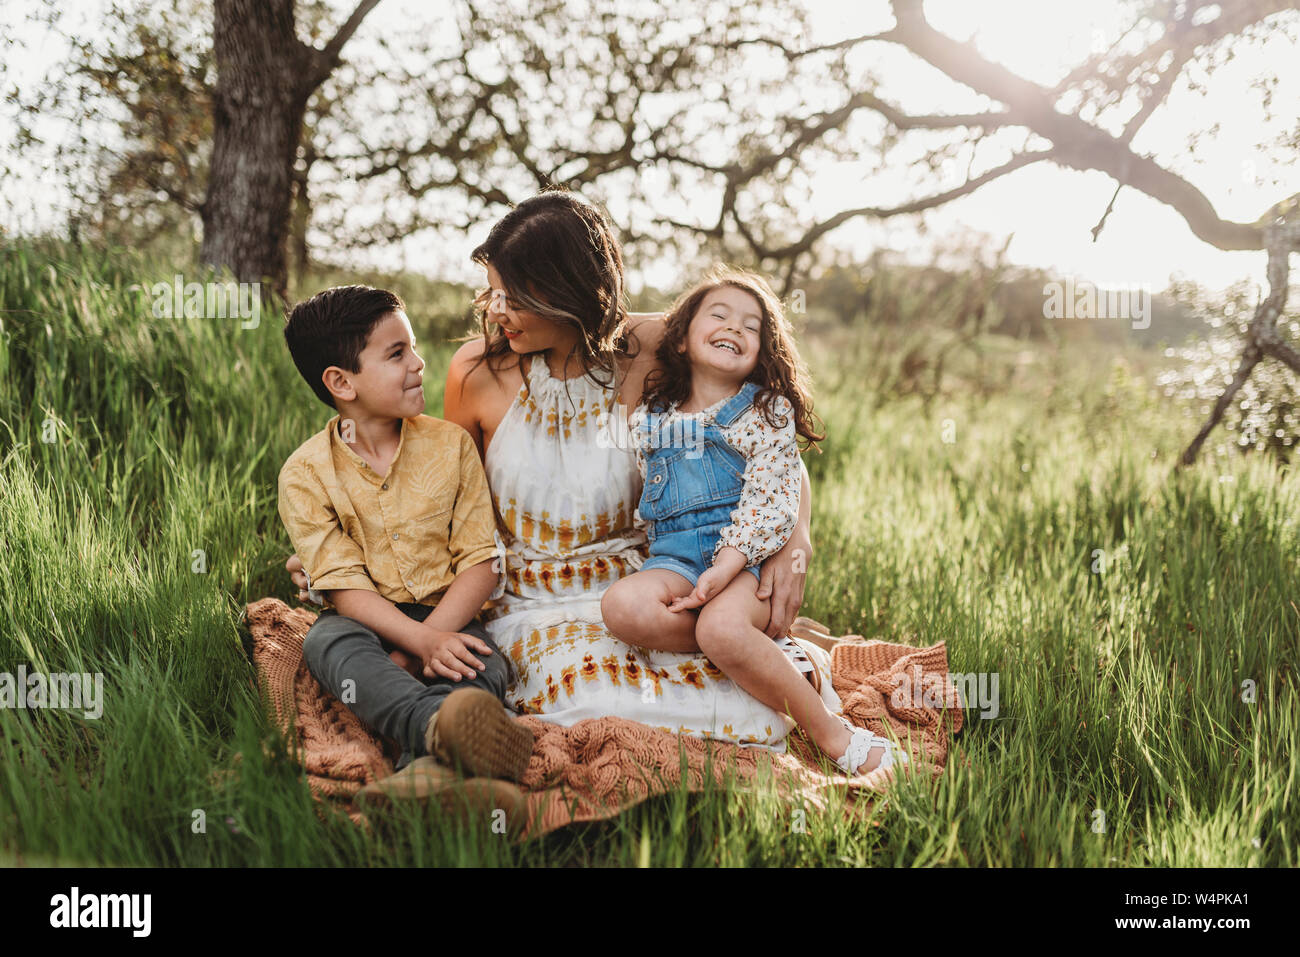 Mother, son, and daughter in backlit field smiling at each other Stock Photo